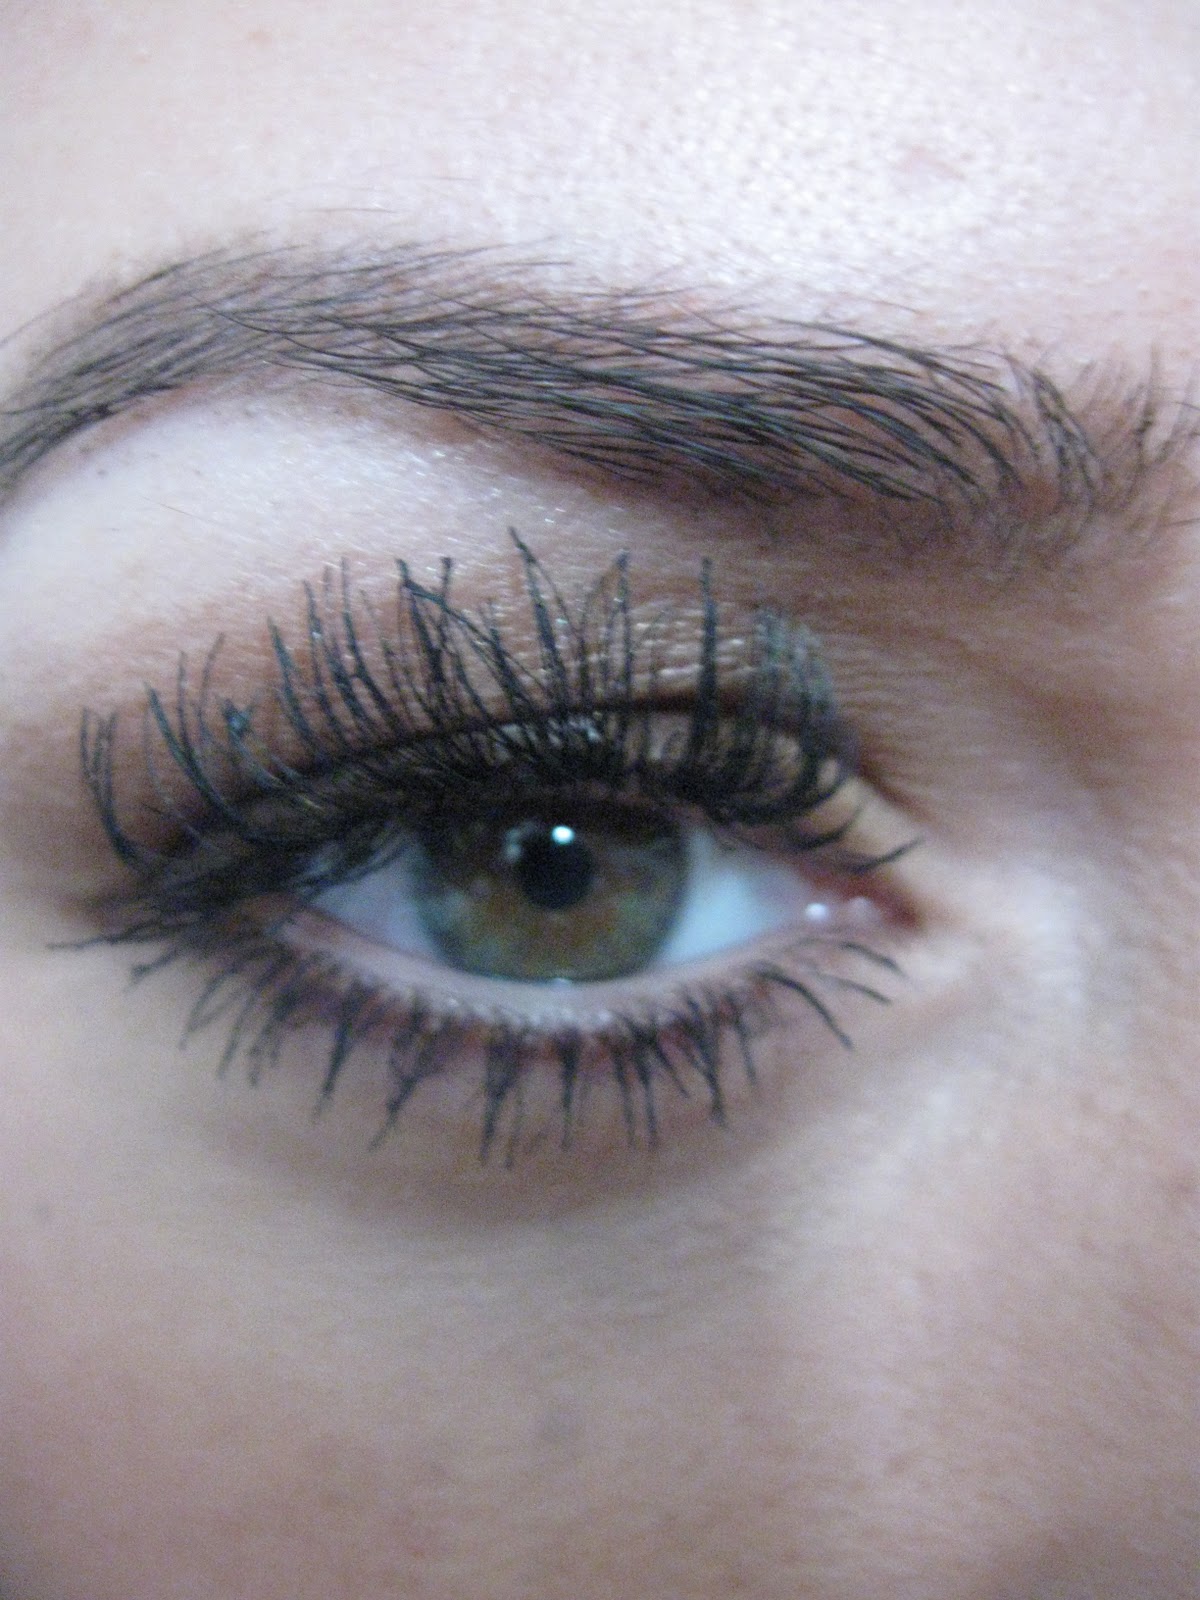 Chanel Inimitable mascara - discover if it gives you lashes to die for